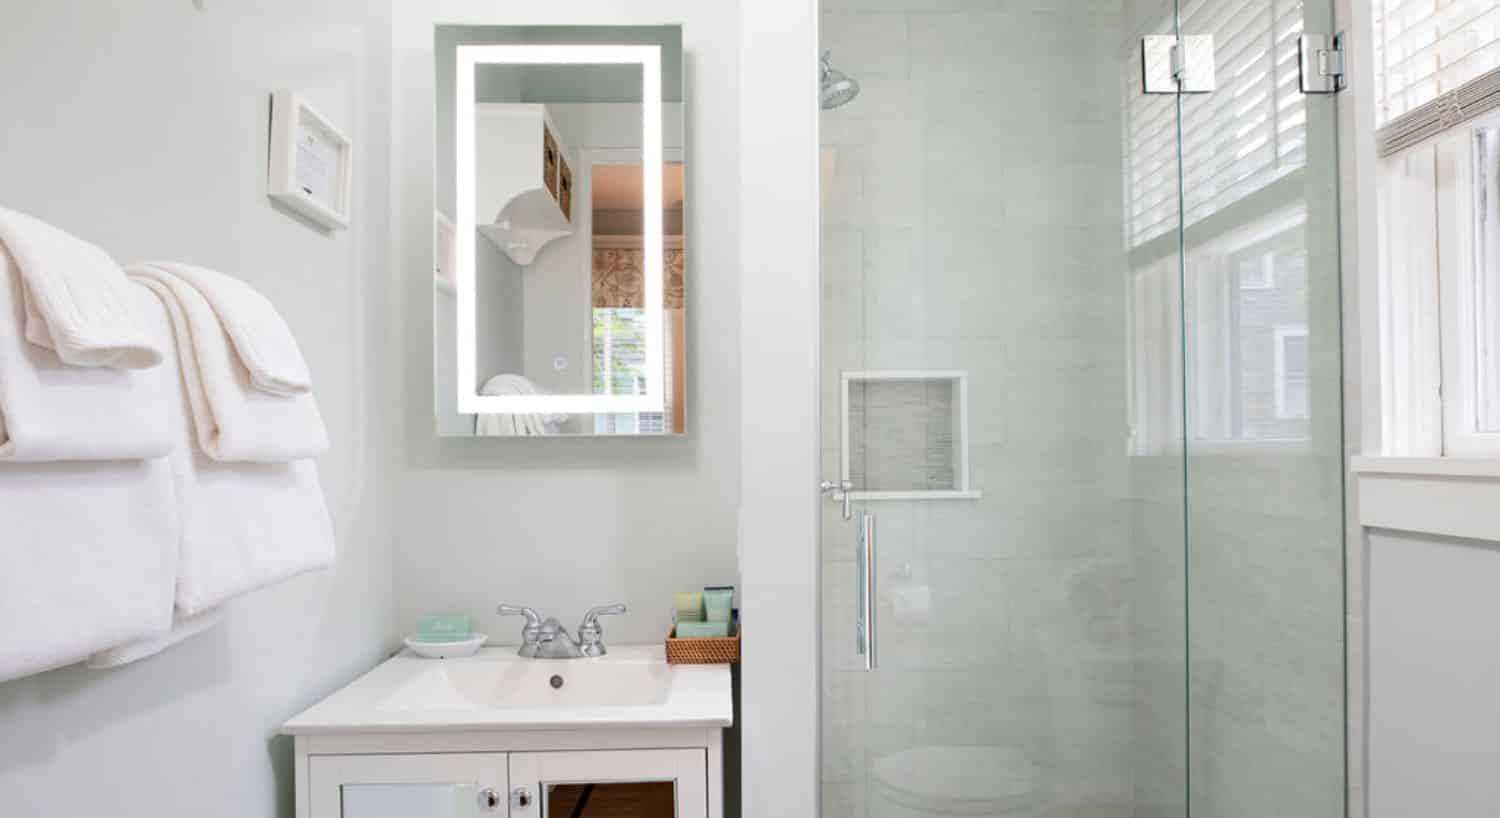 Bathroom with white vanity, medicine cabinet with mirrored front, and tiled shower with glass door